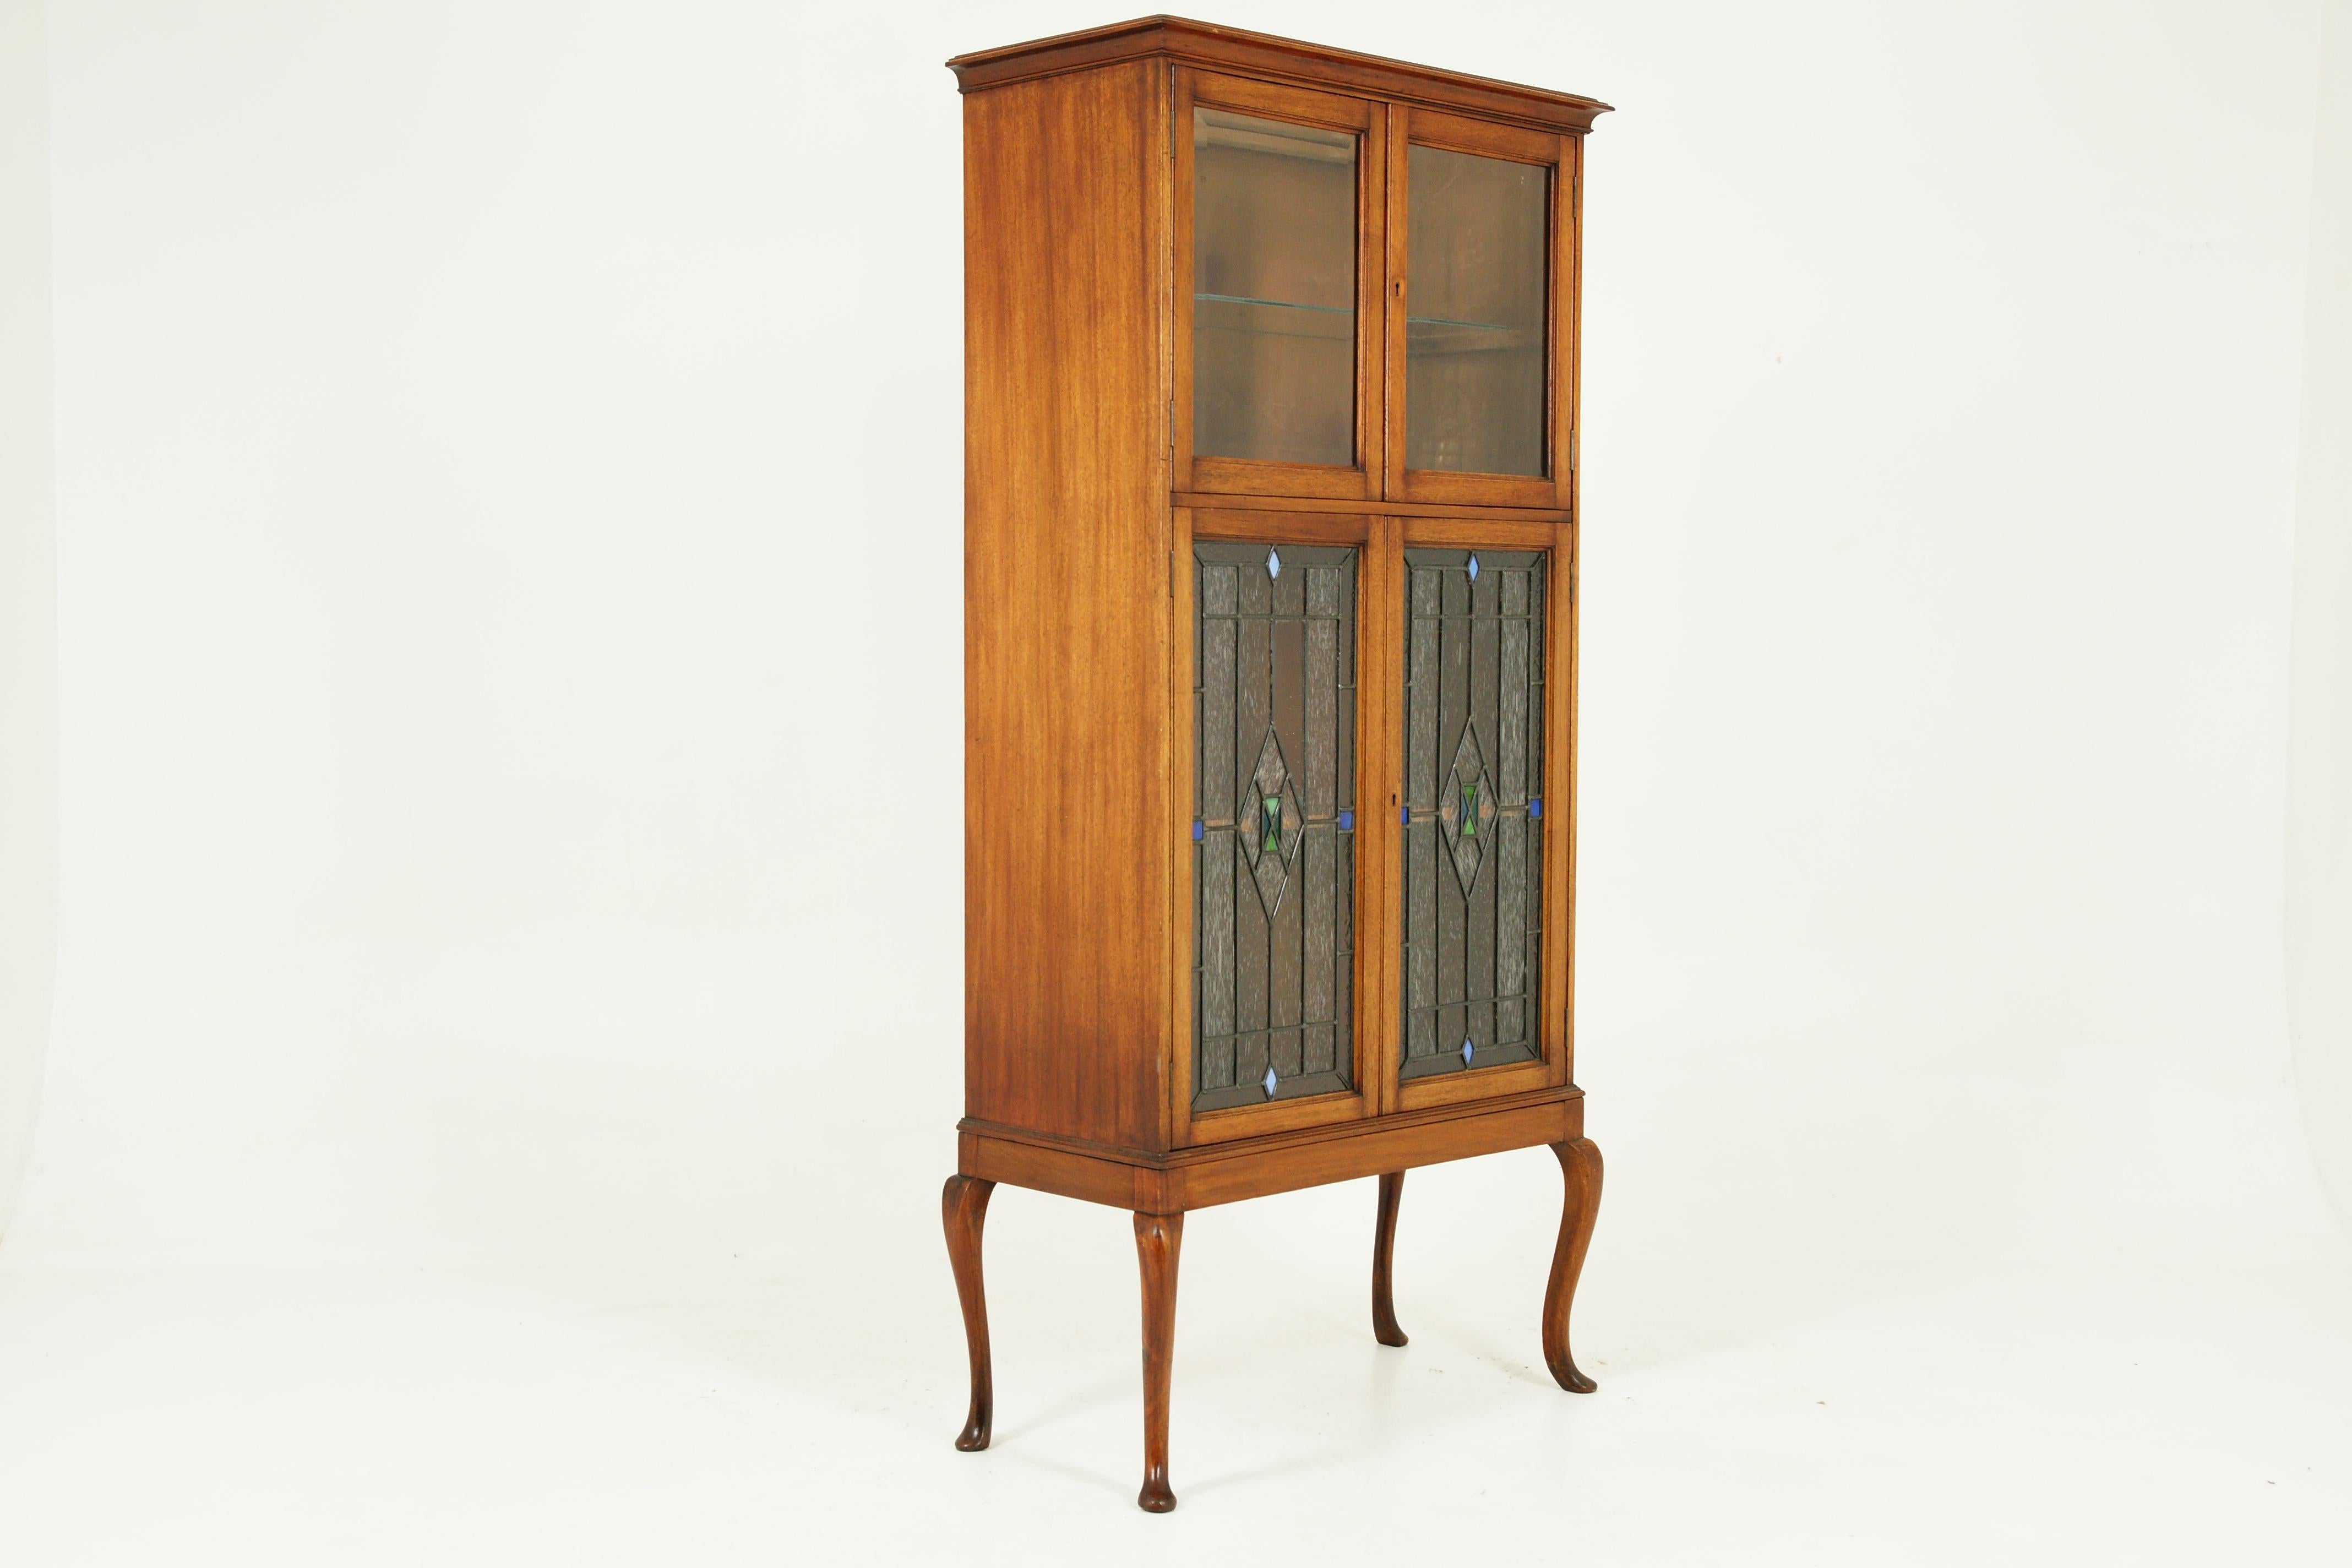 Early 20th Century Antique Walnut Cocktail Cabinet, Stained Glass, Arts & Crafts, Scotland 1910